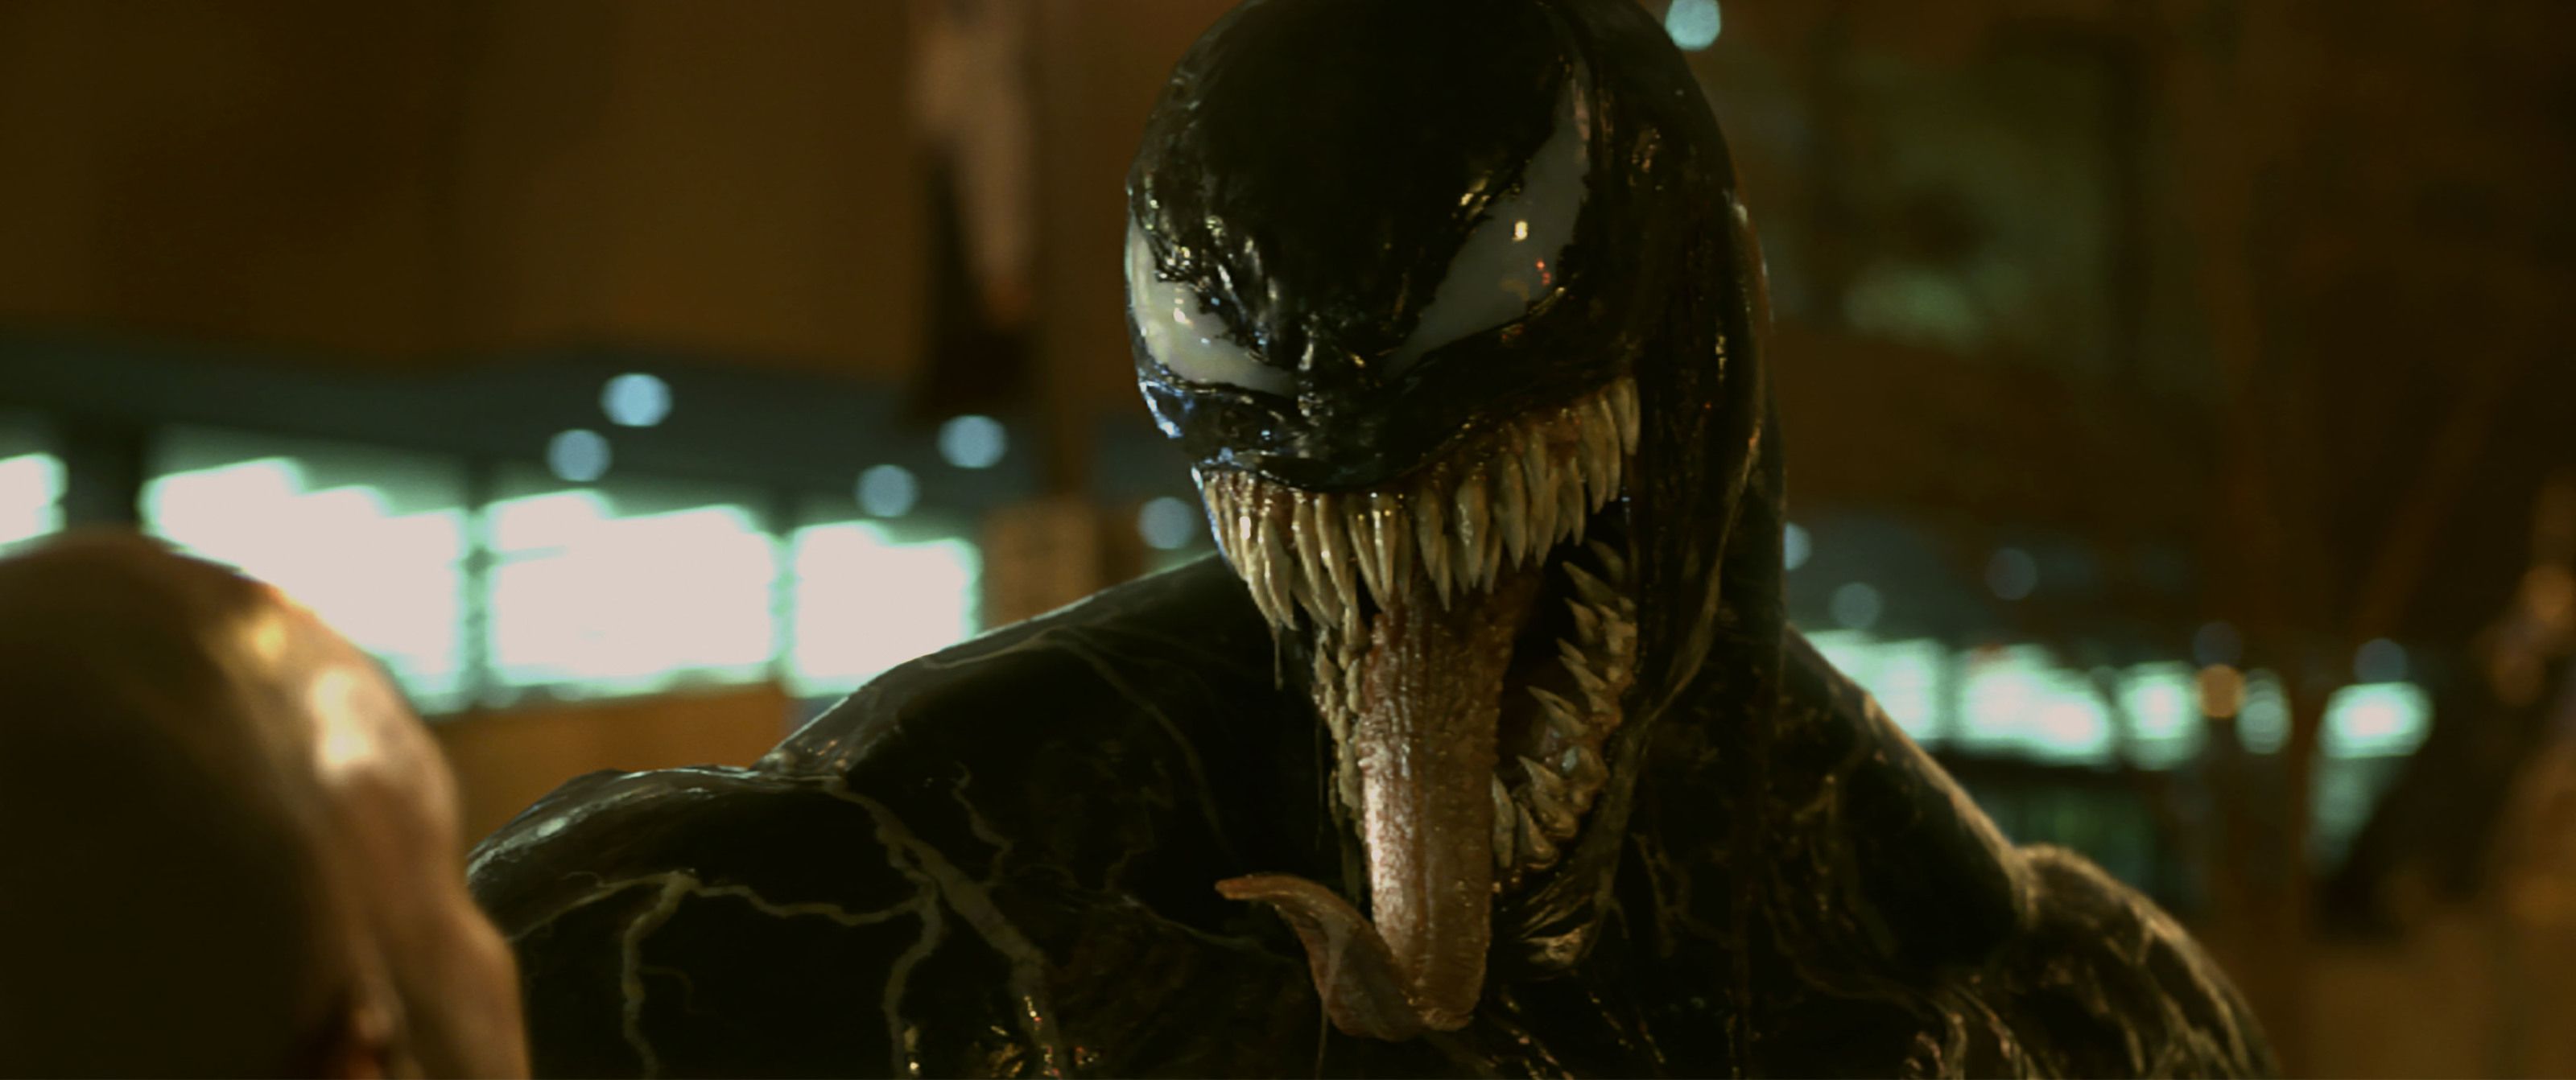 Will the Venom: Let There Be Carnage trailer drop during the Super Bowl?